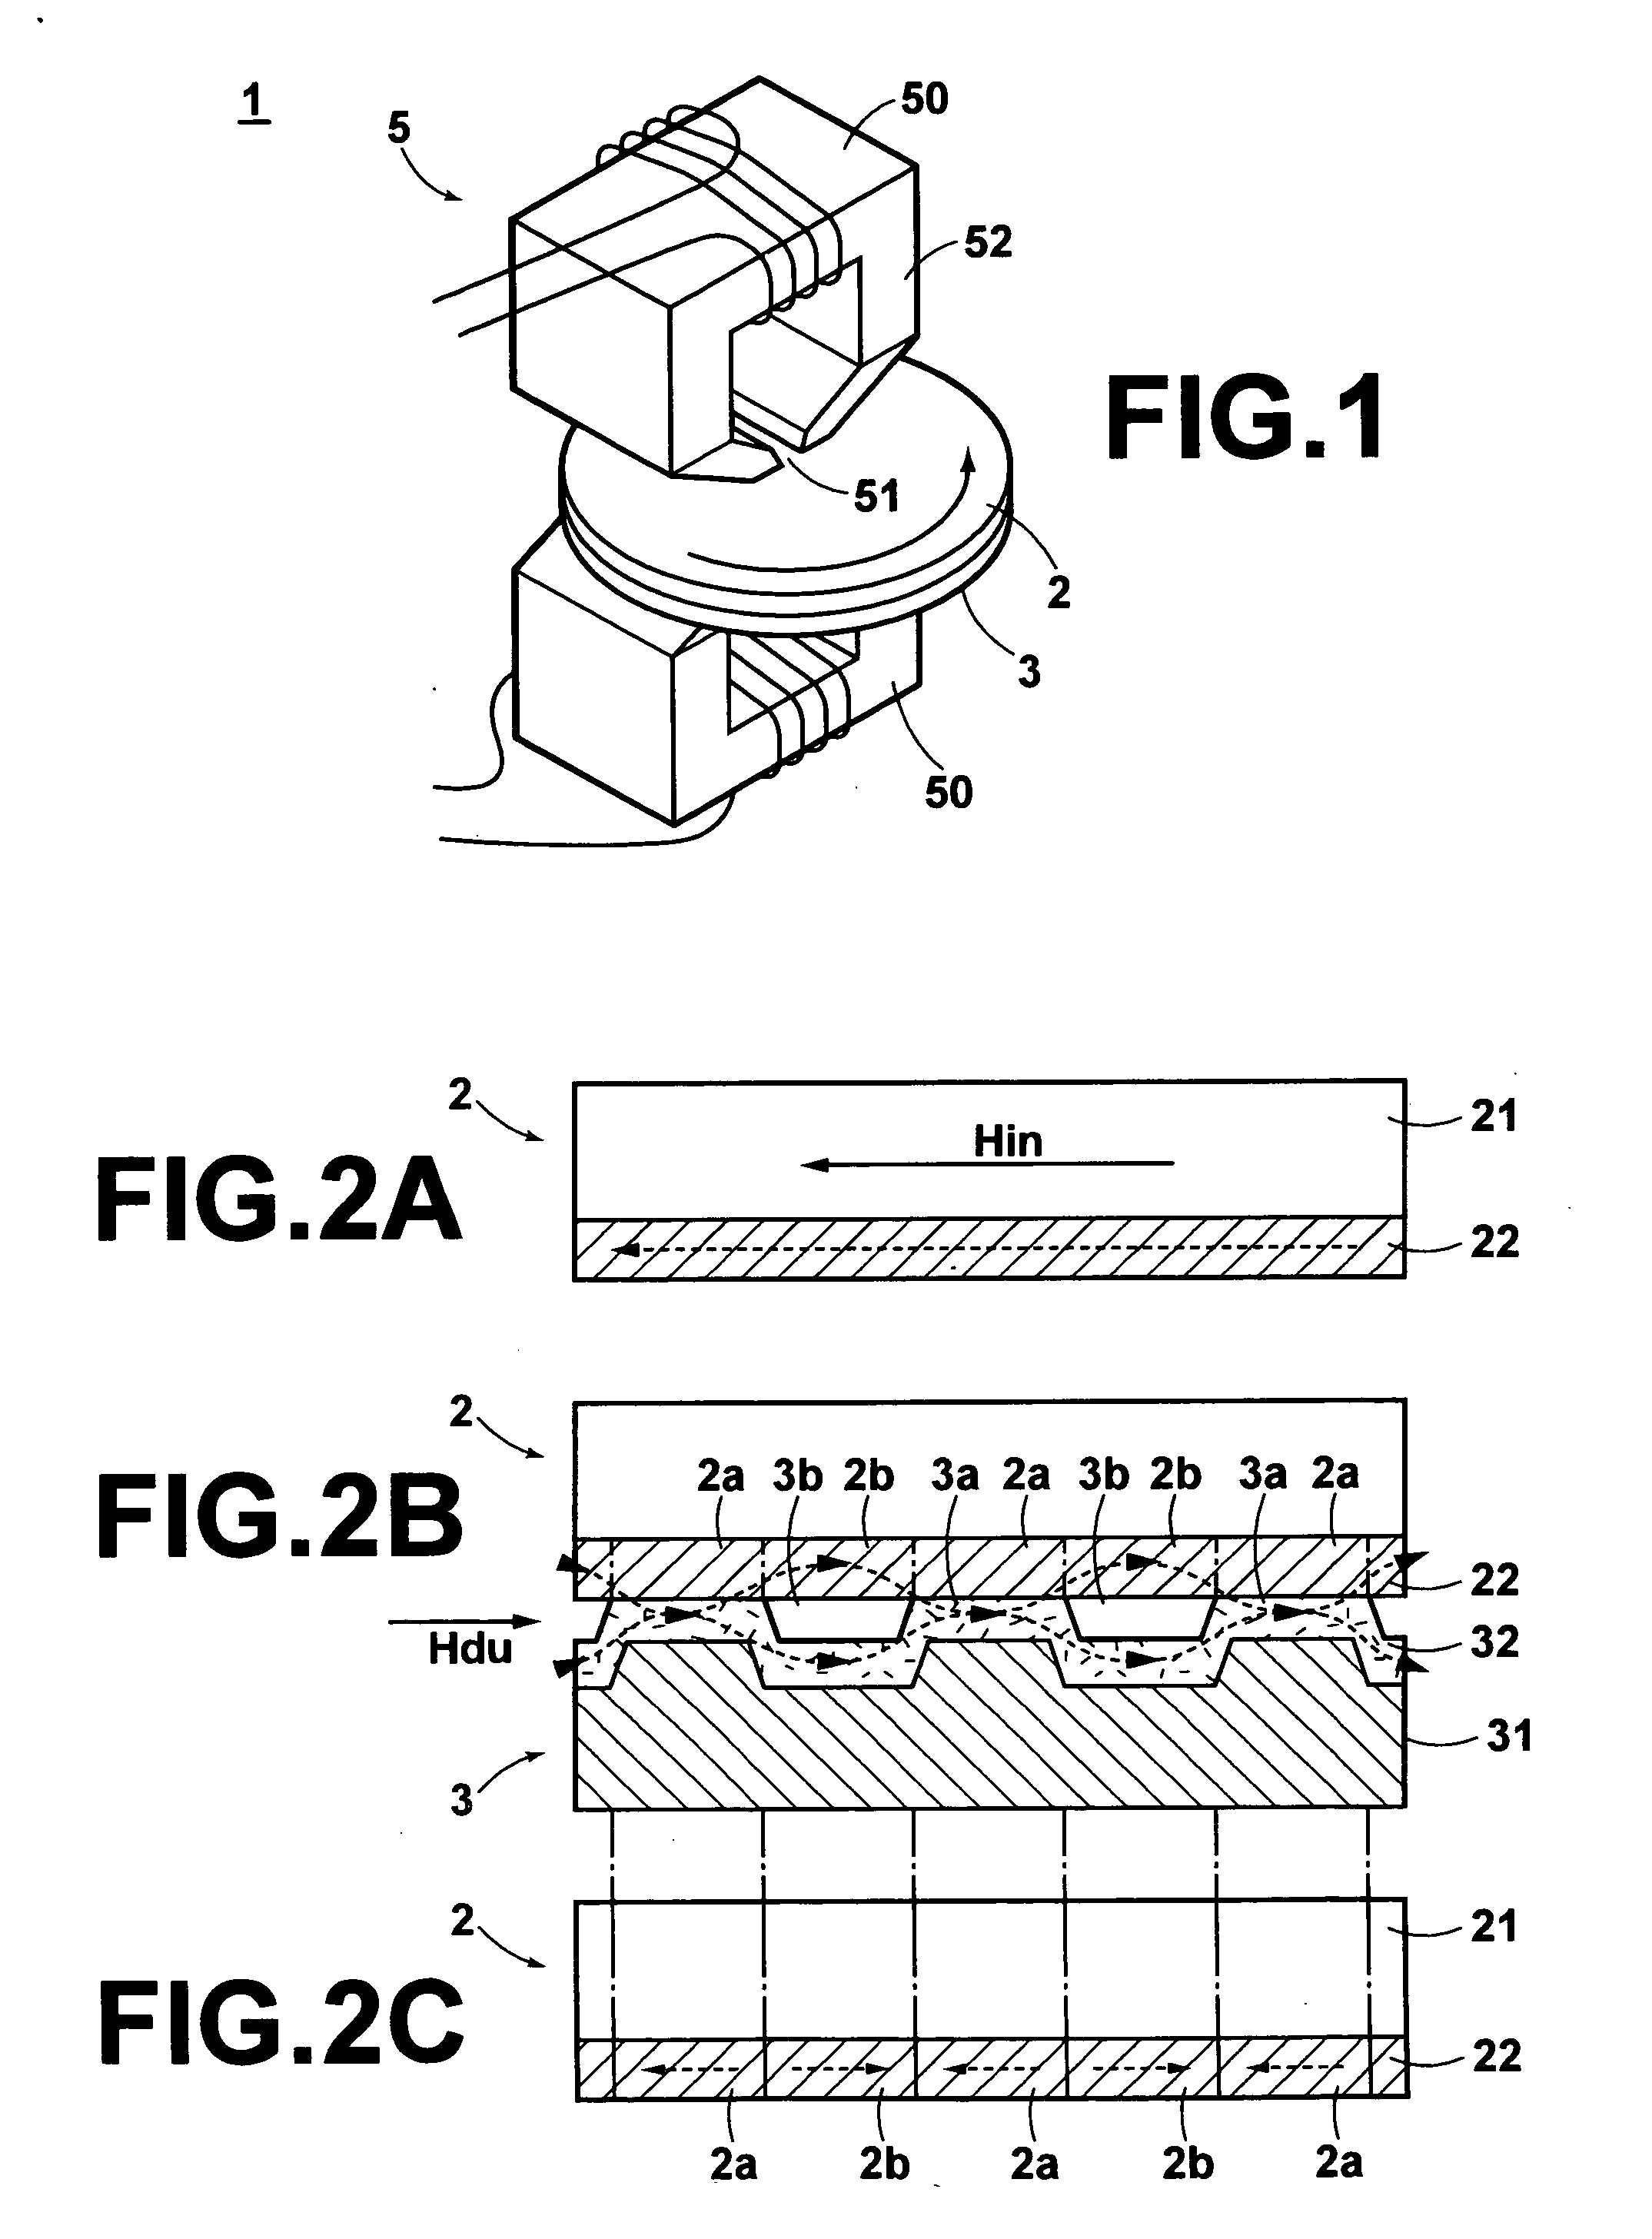 Process for producing magnetic recording medium with limited coercivity squareness ratio